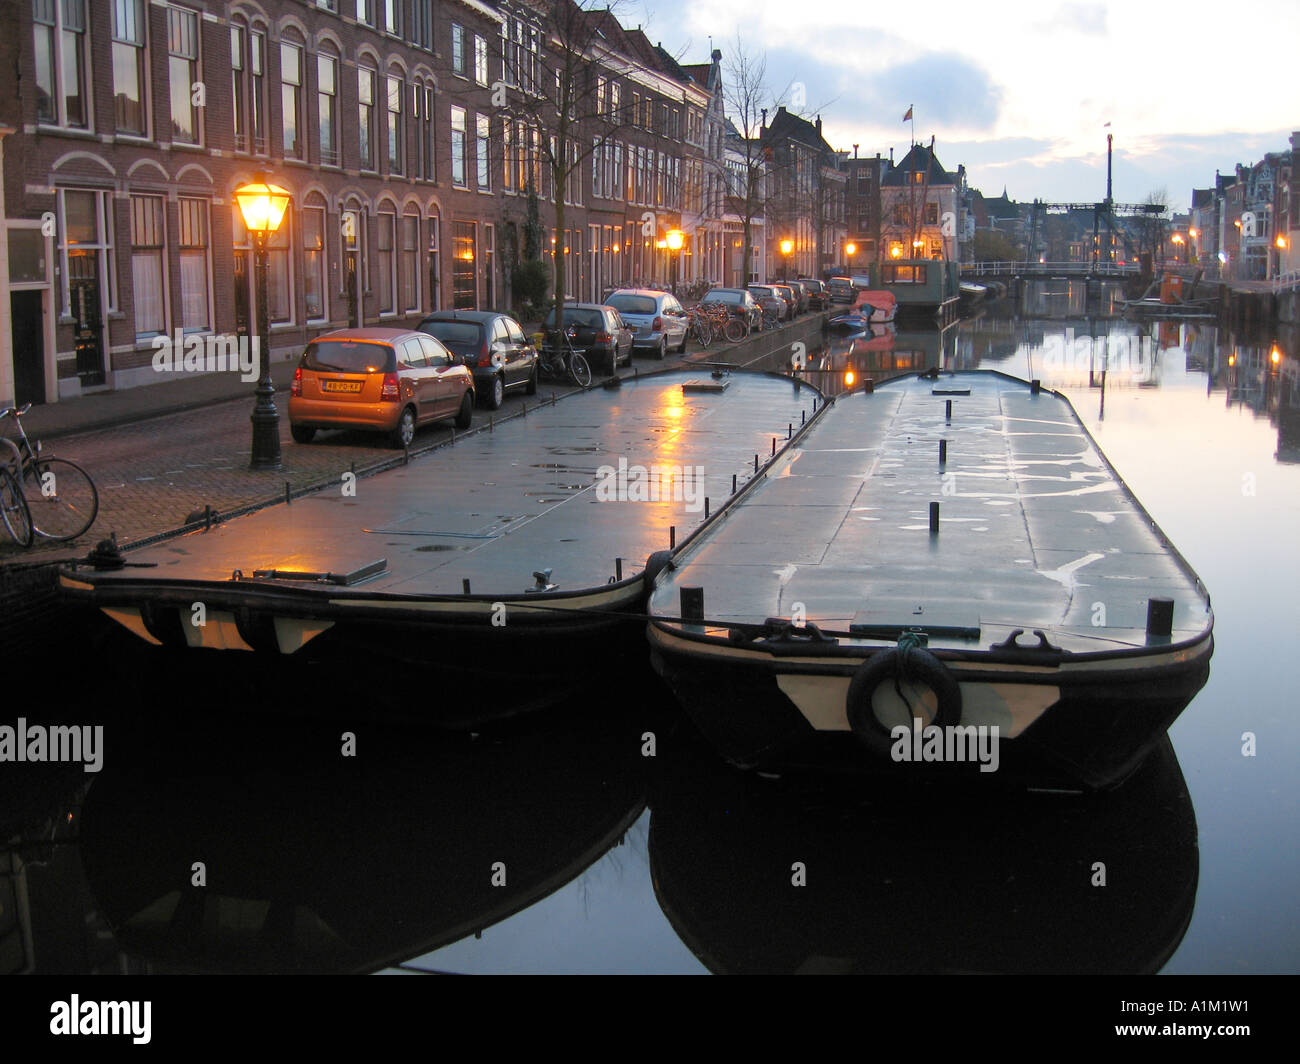 Two ships in a canal in Leiden Holland Stock Photo